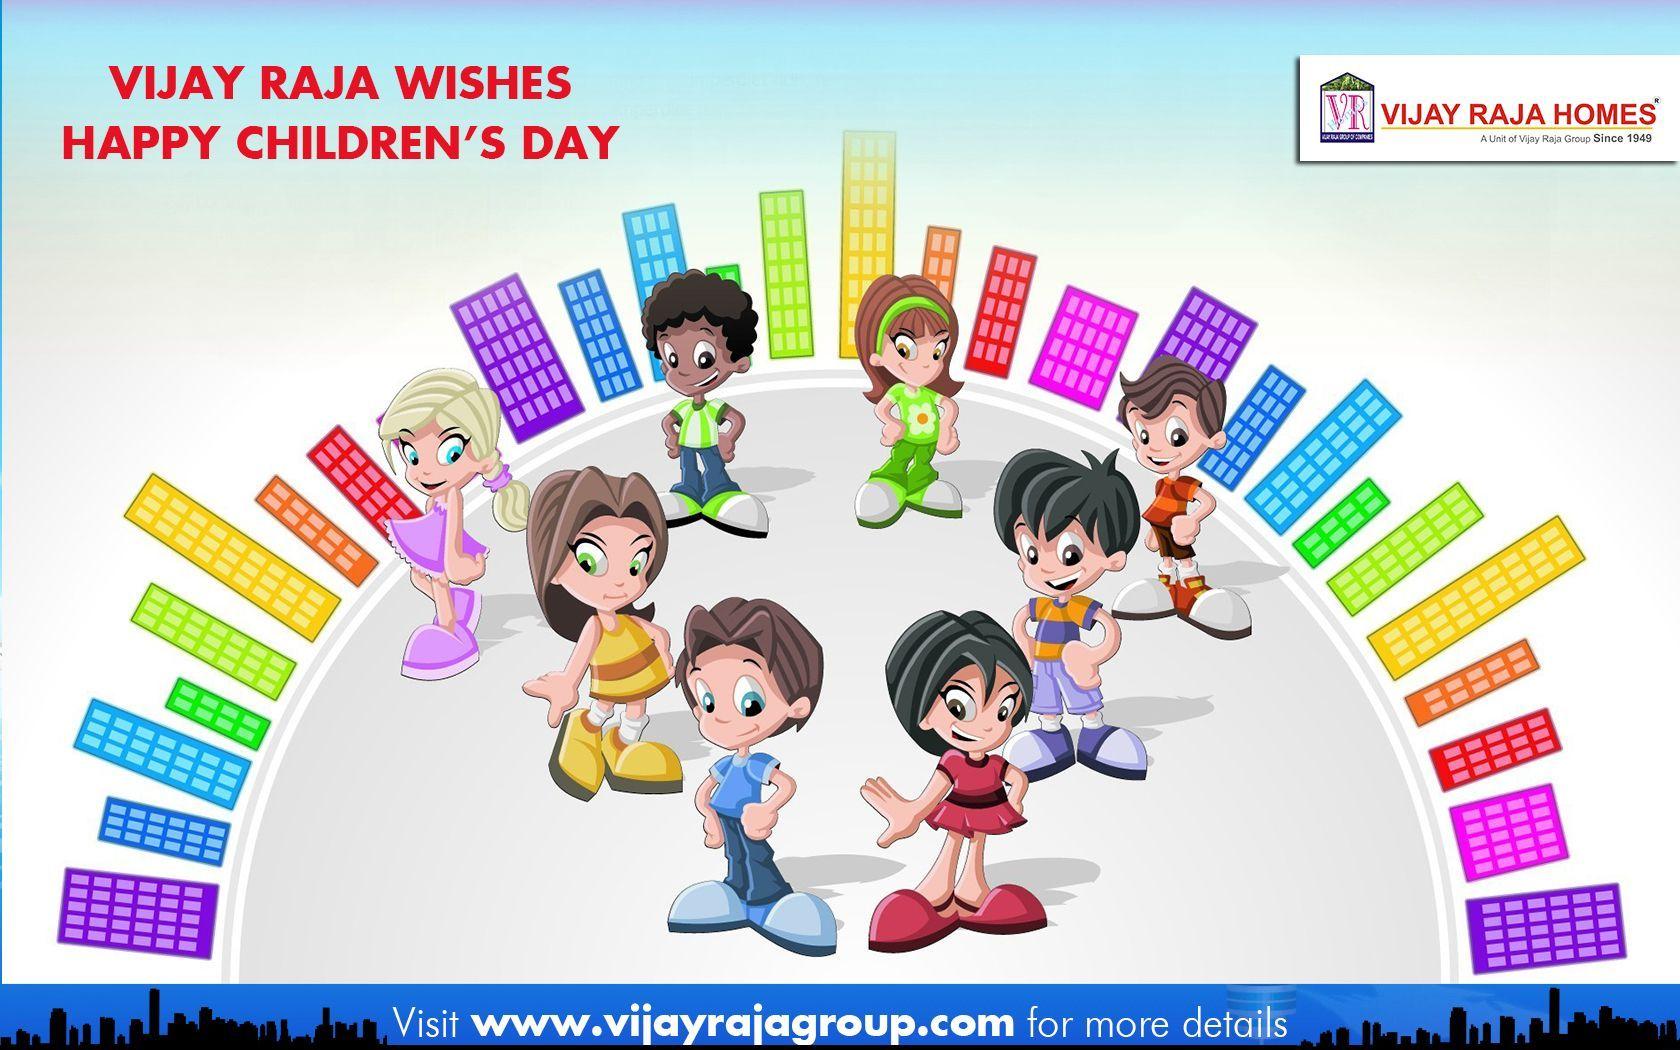 HAPPY CHILDREN'S DAY WISHES from Vijay Raja Group of Companies